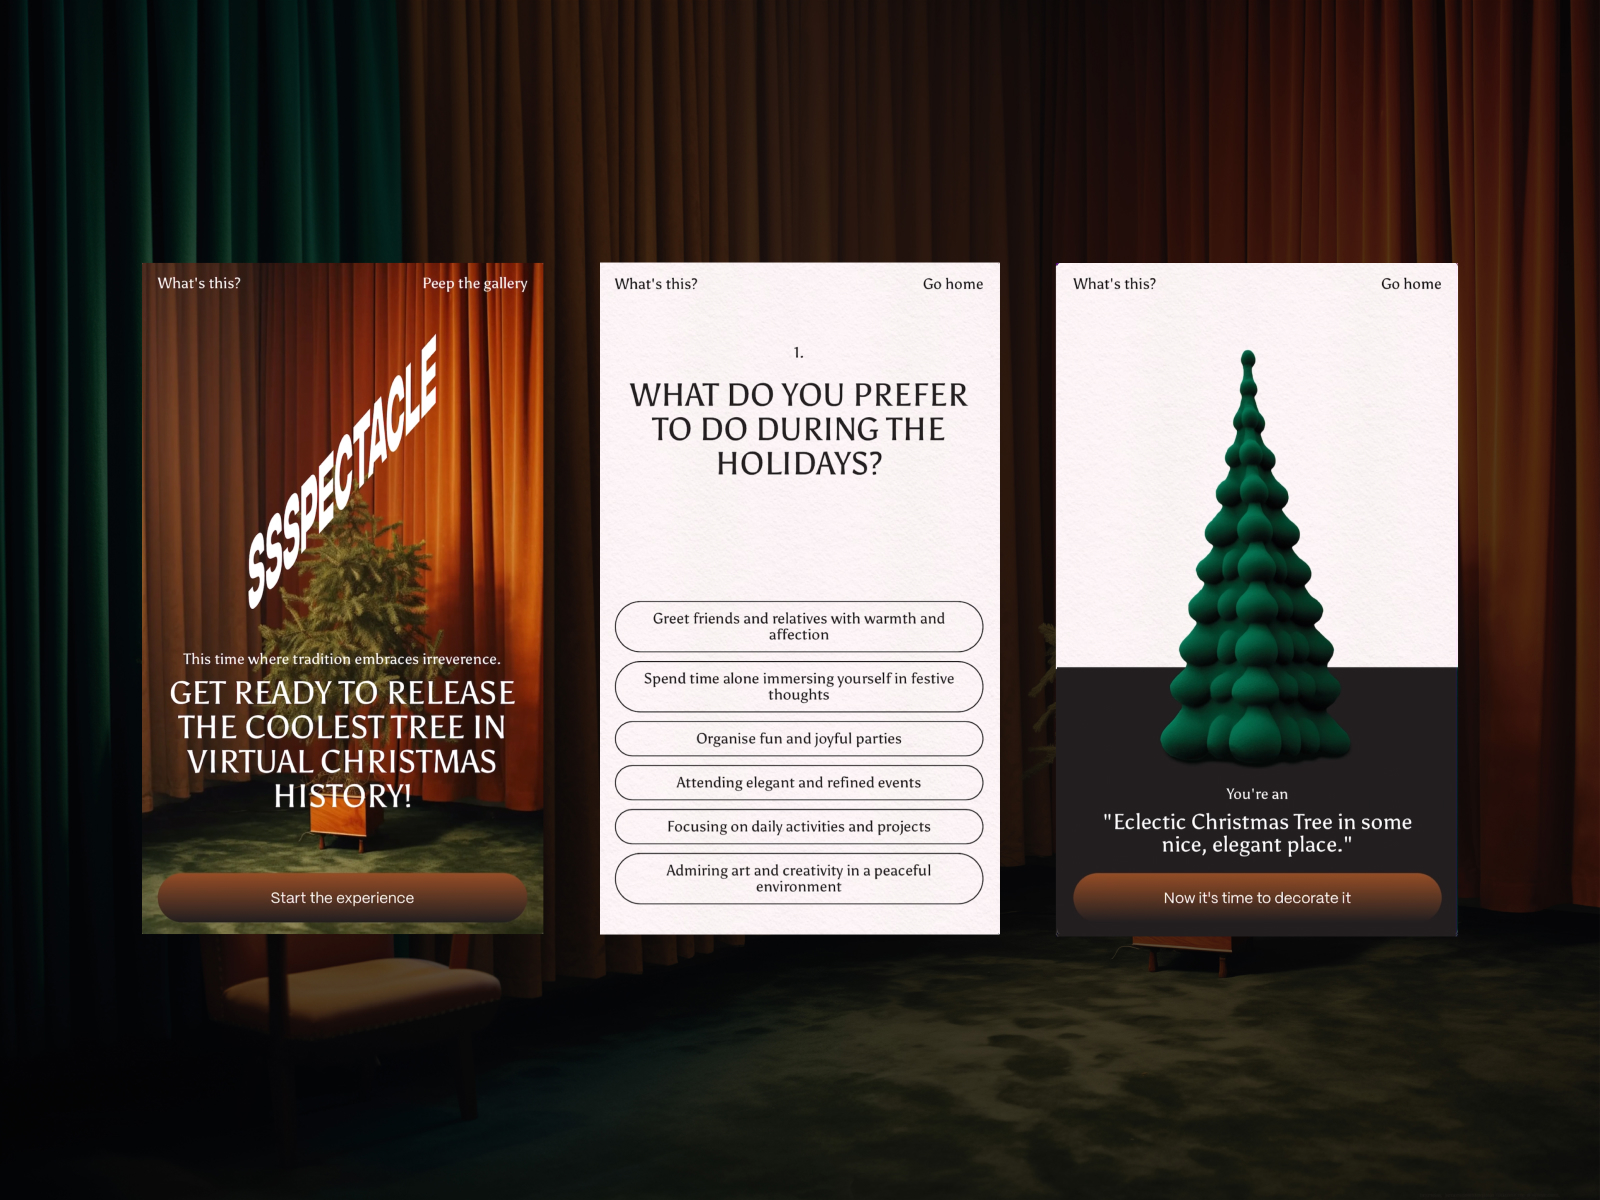 Answer the test questions and discover your Christmas tree.